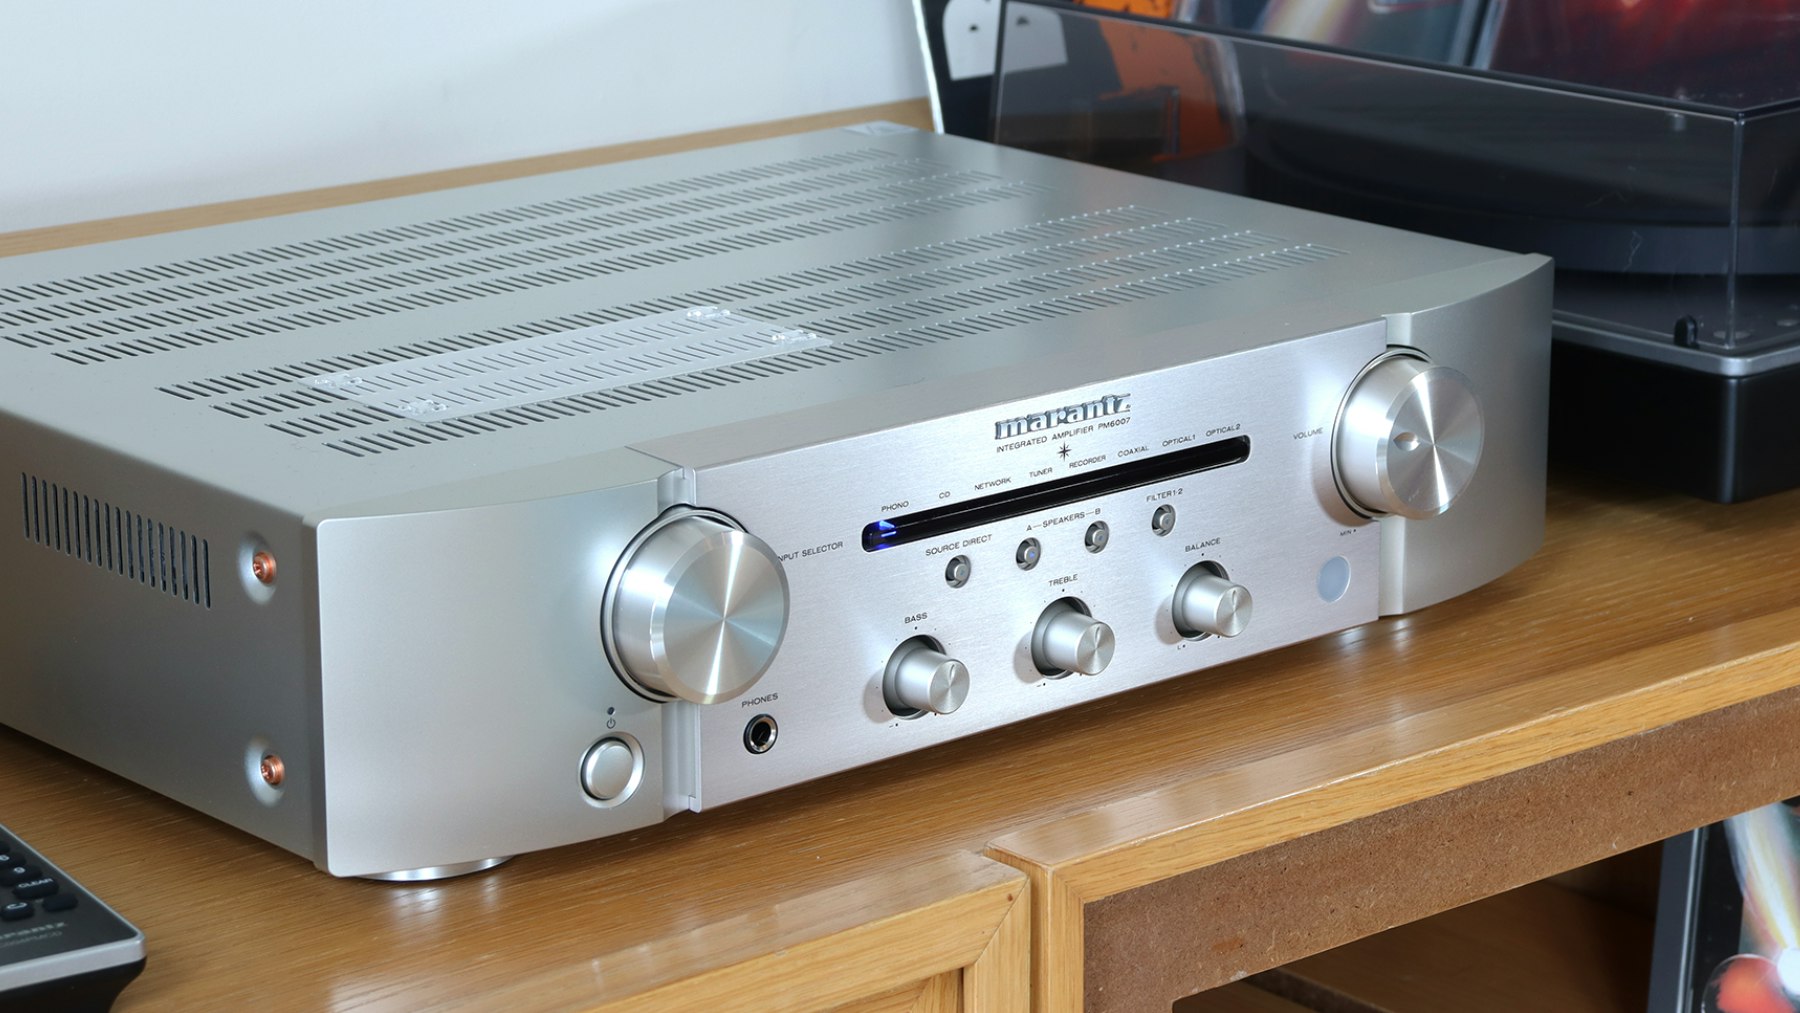 Marantz PM6007 review: a formidable entry-level stereo amplifier